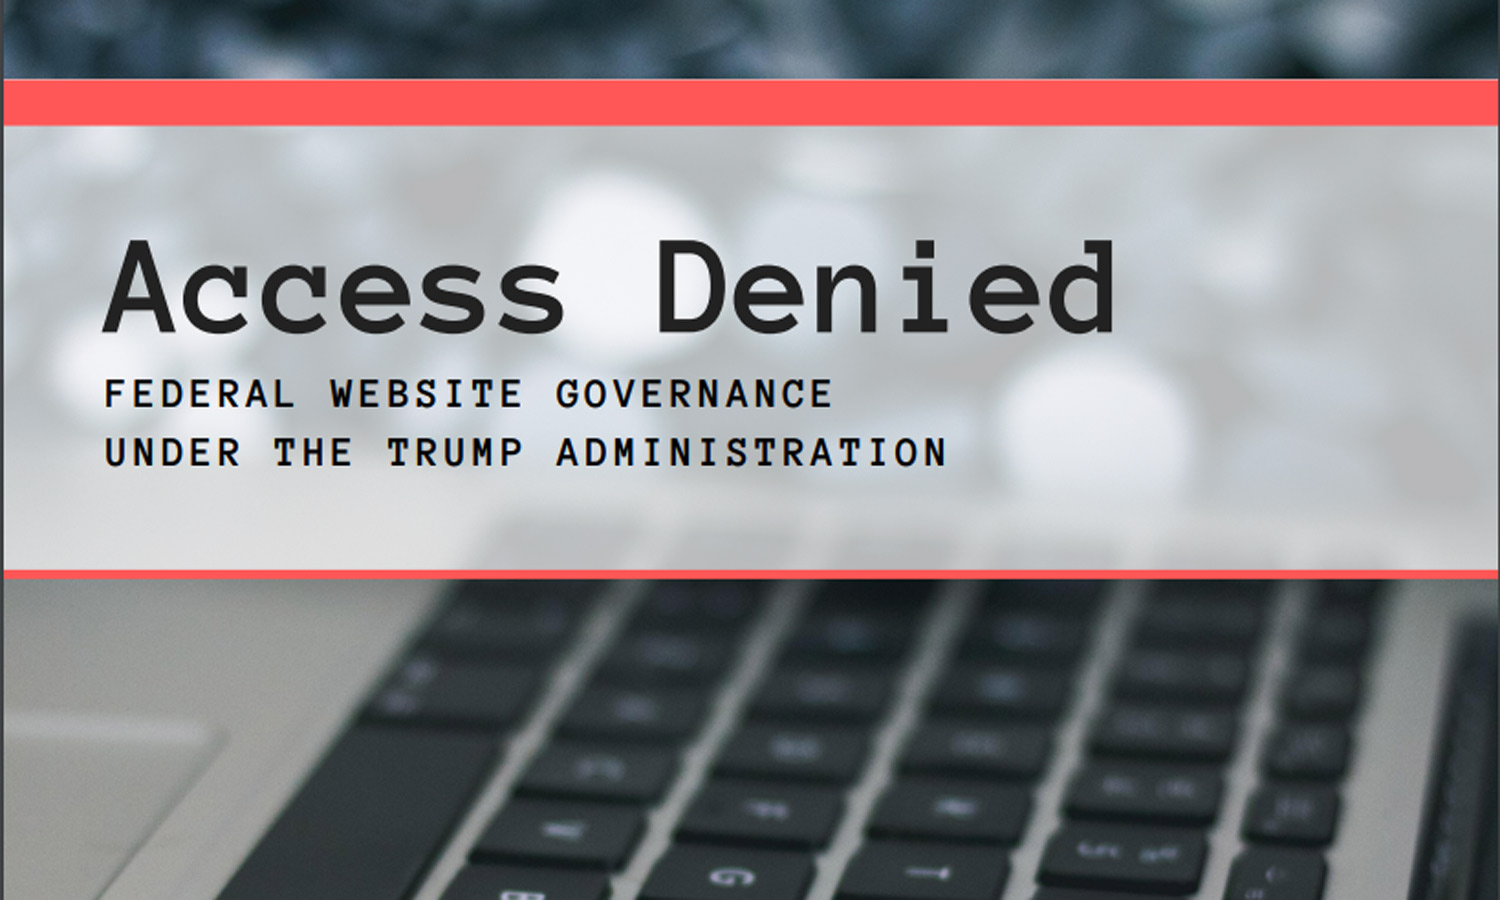 Censorship of Federal Environmental Agency Websites Under Trump: What We Learned and How to Protect Public Information Moving Forward